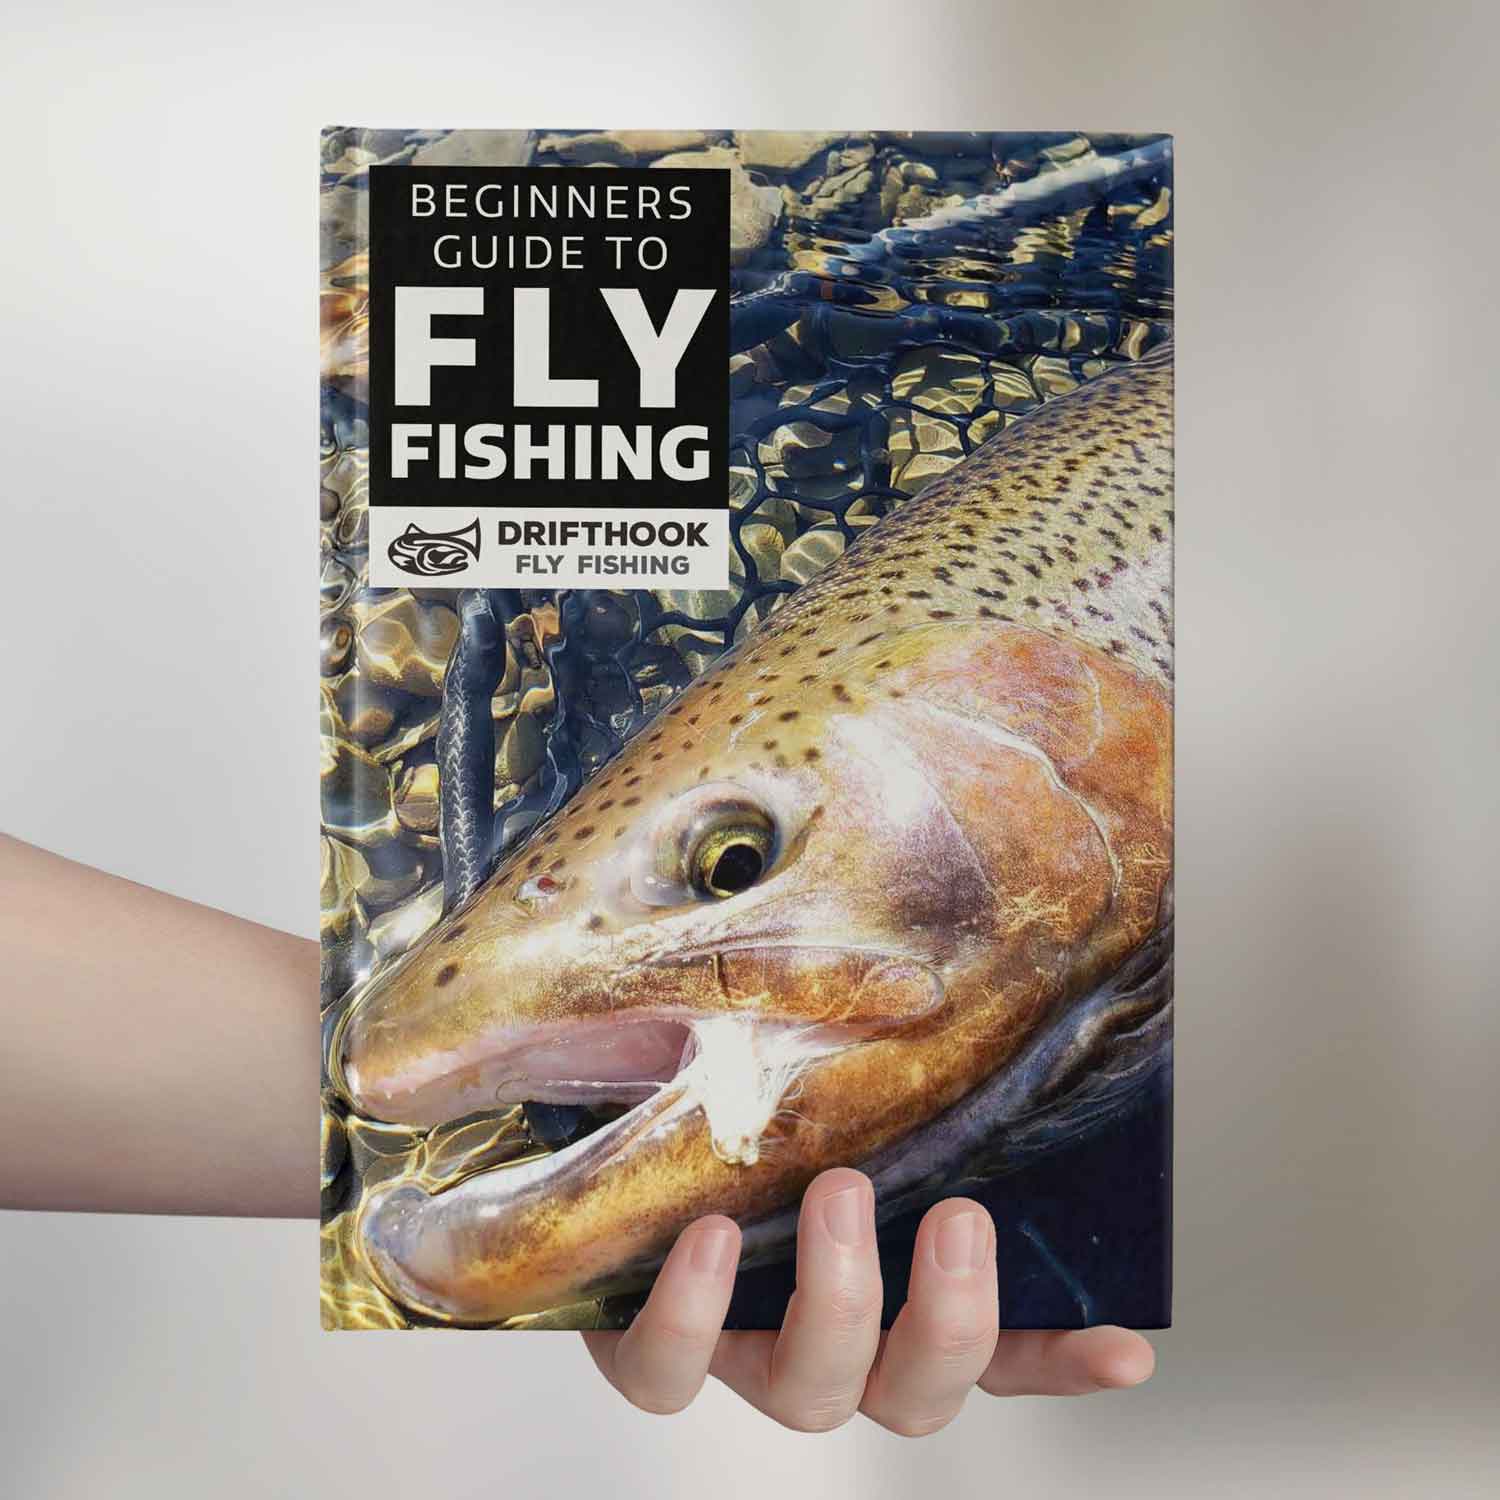 Beginners Guide to Fly Fishing Hard Cover Ebook